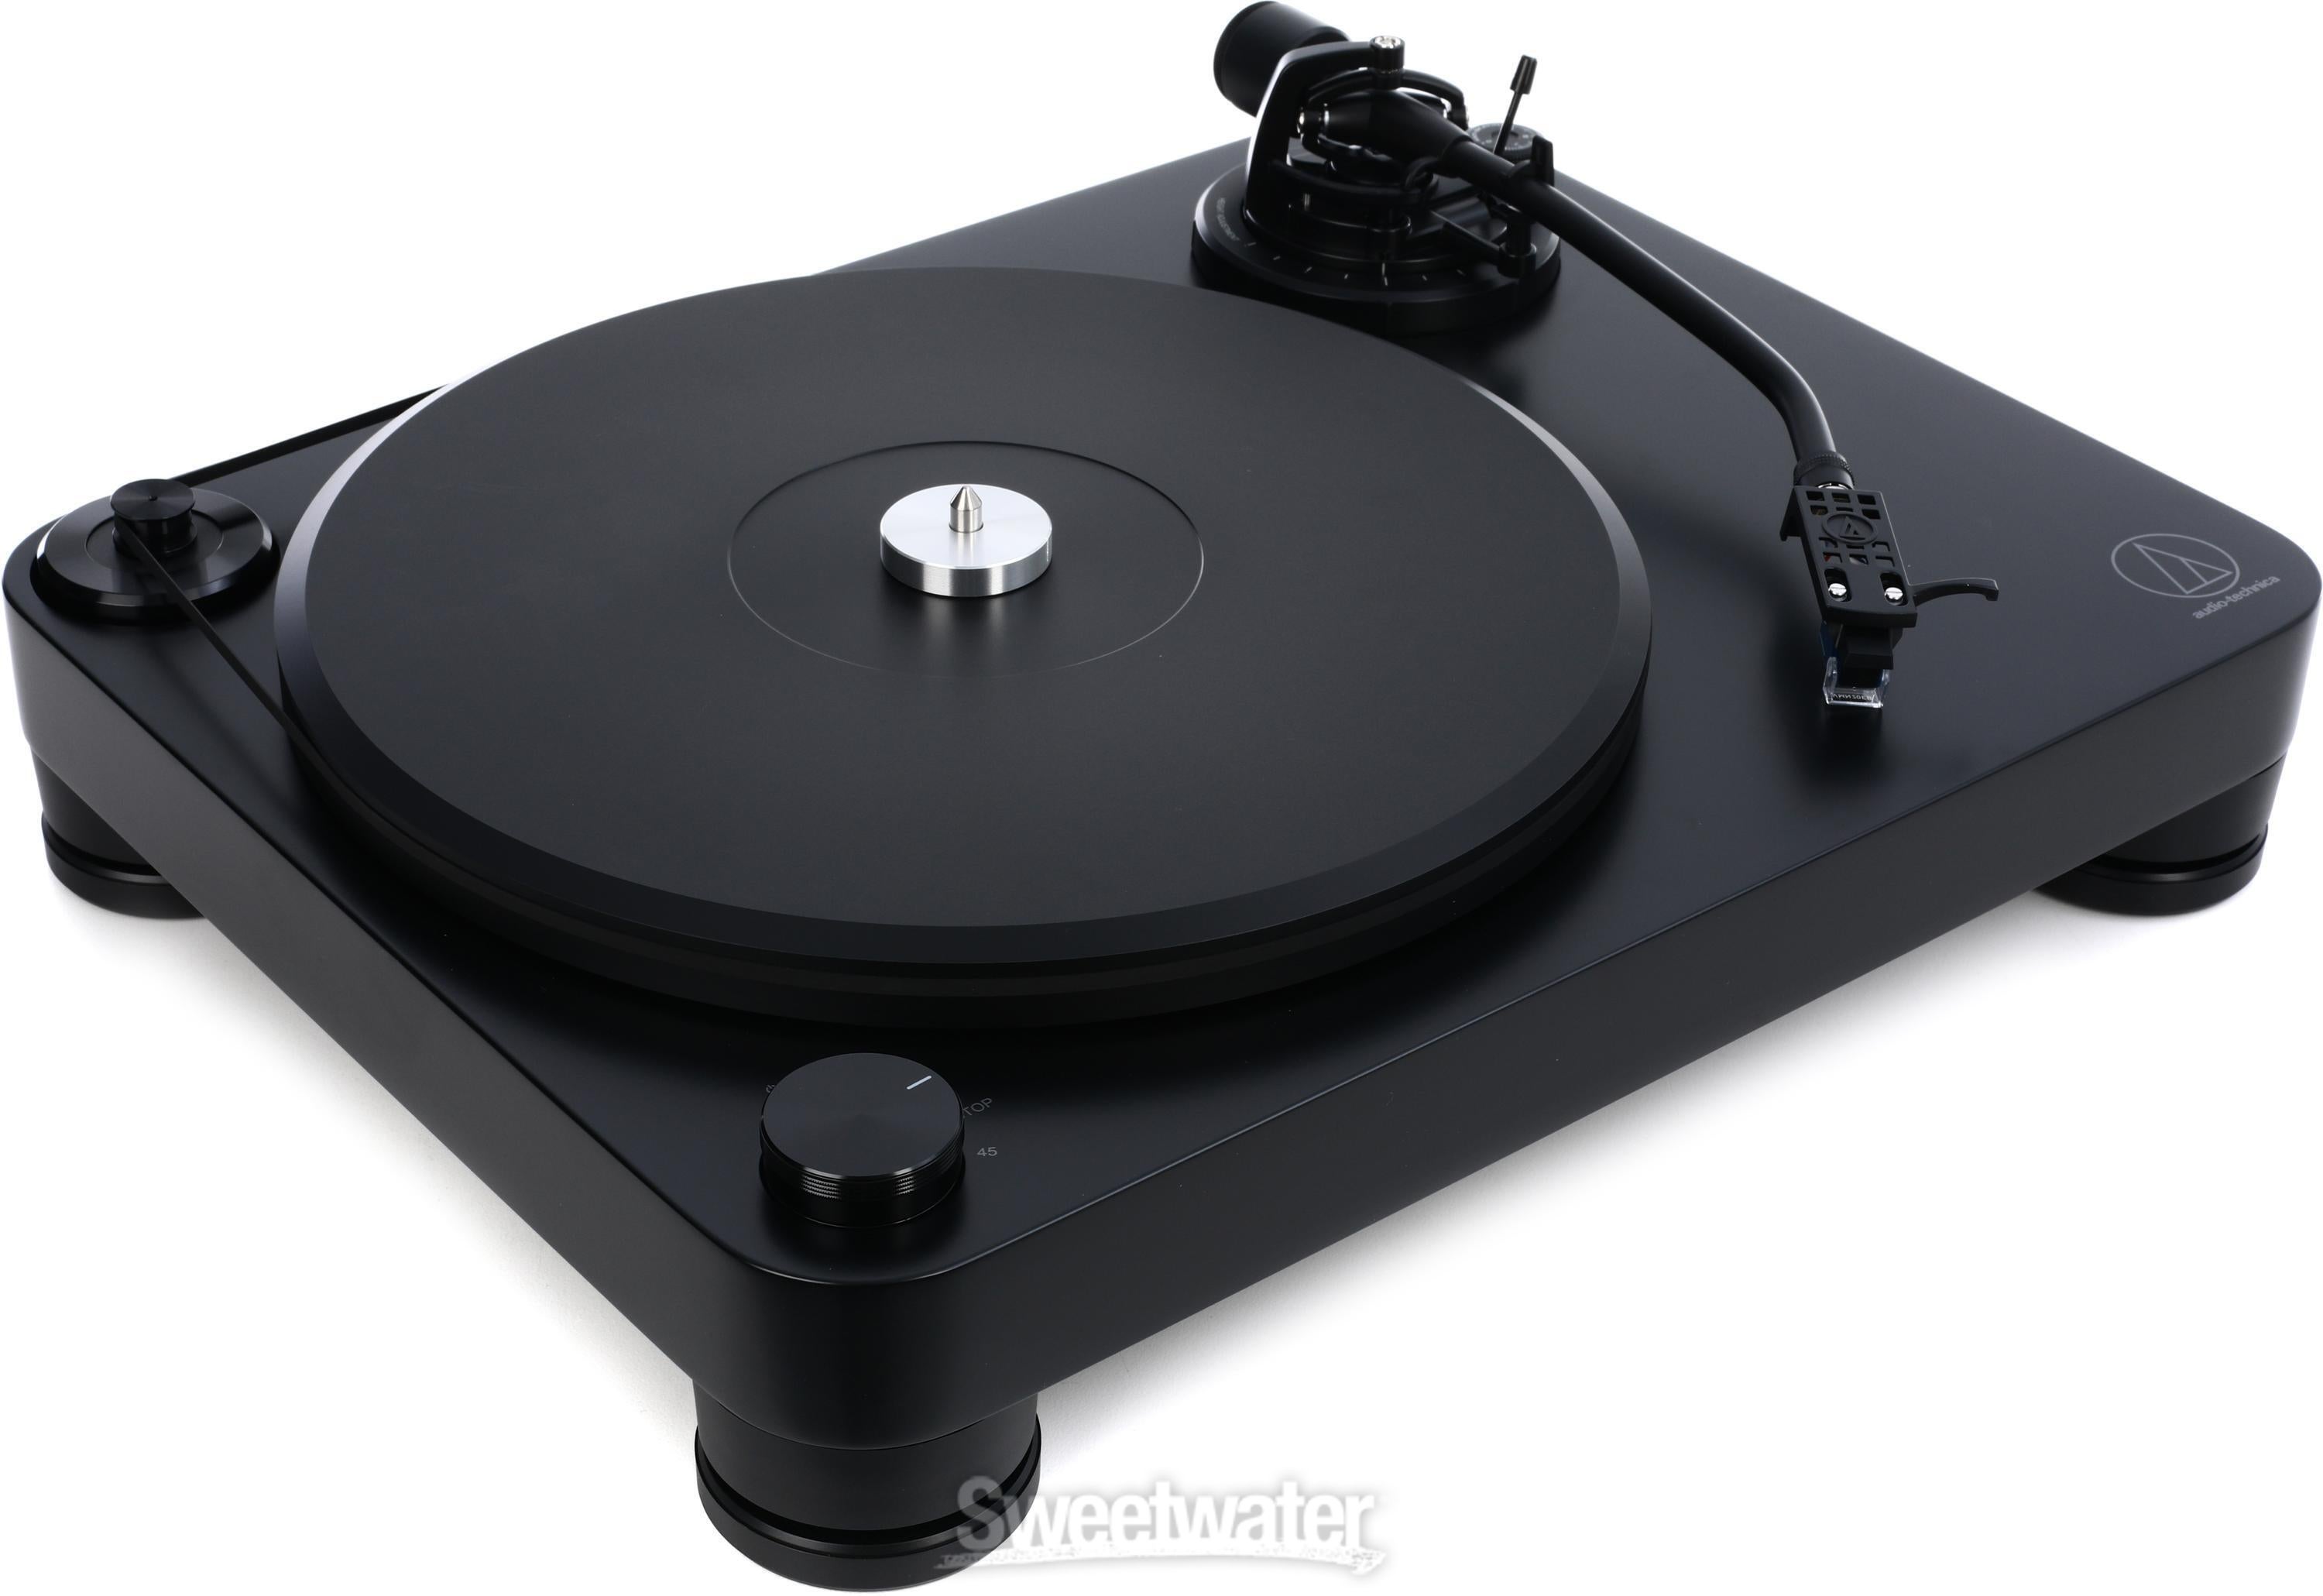 Audio-Technica AT-LP7 Manual Belt-Drive Turntable | Sweetwater